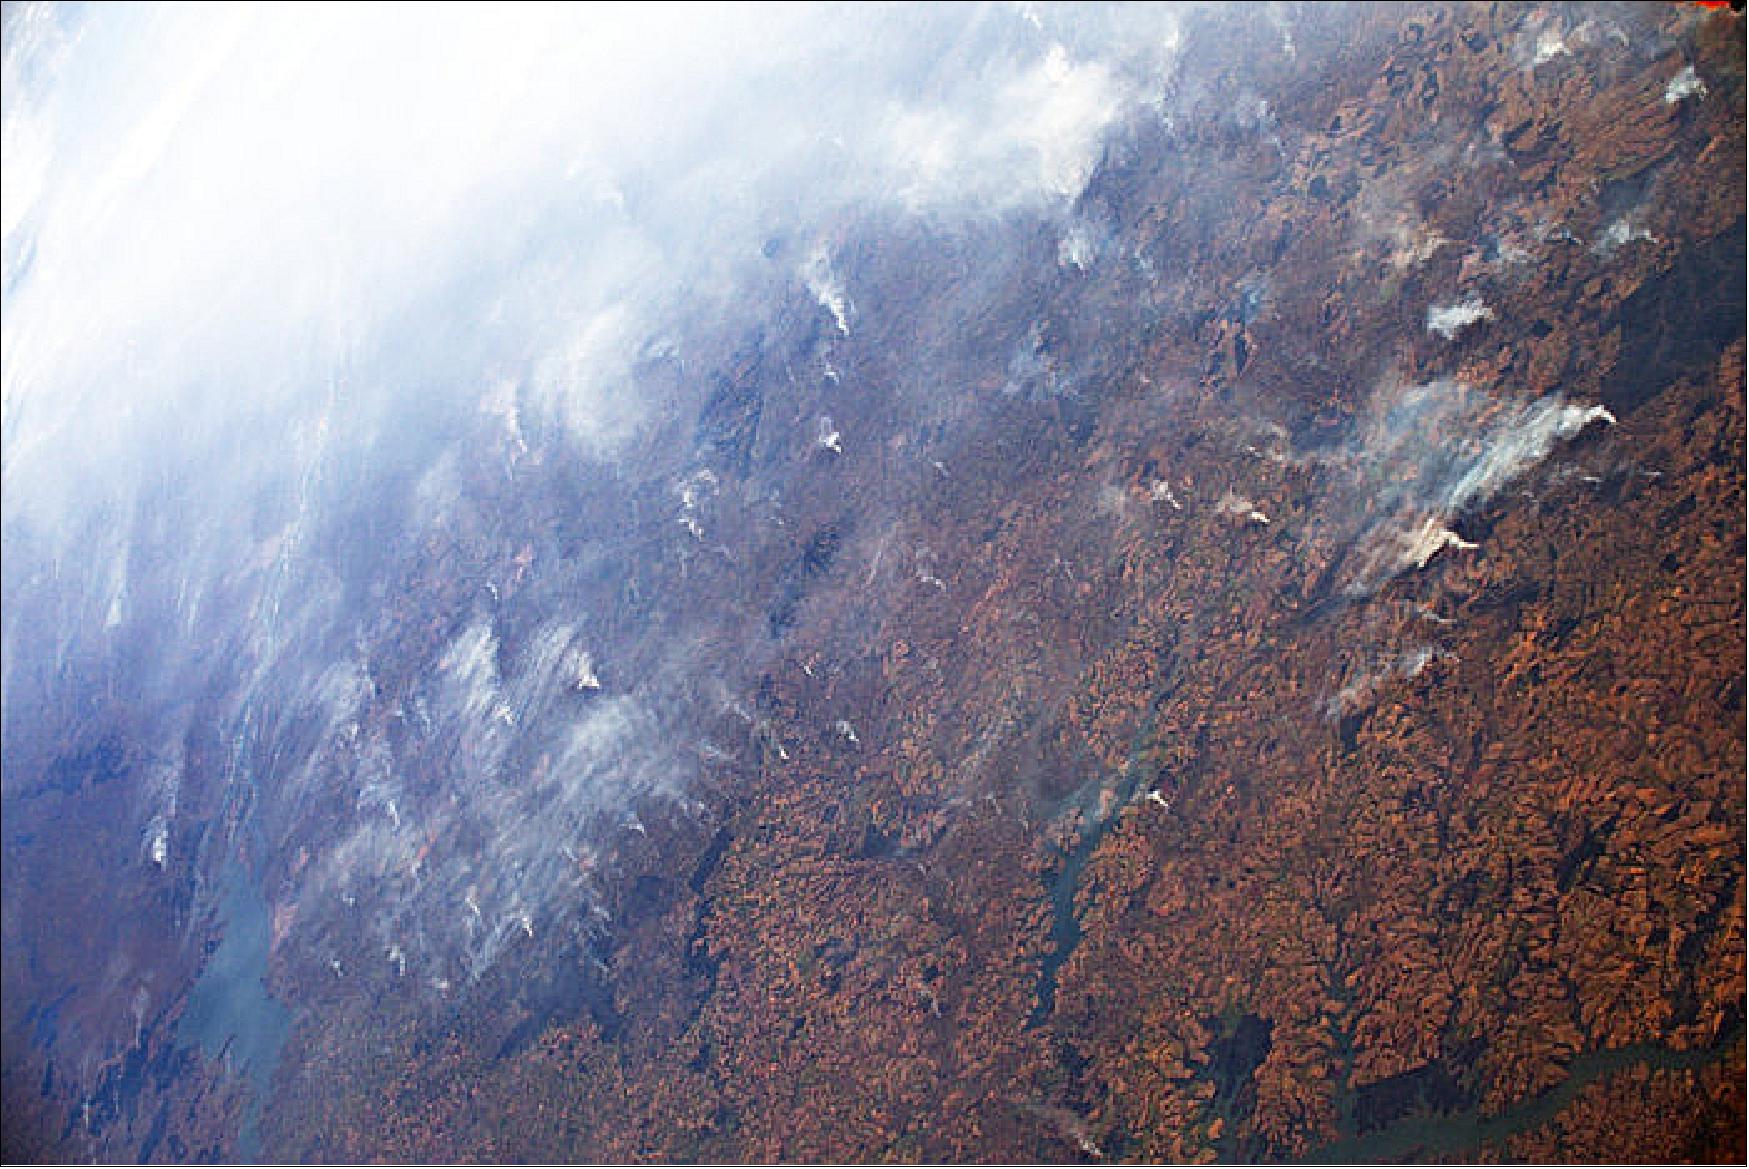 Figure 59: The Amazon rainforest is burning. ESA astronaut Luca Parmitano took this image, among a series, from his vantage point 400 km above Earth on 24 August 2019. He tweeted the images, captioning them: “The smoke, visible for thousands of kilometers, of tens of human-caused fires in the Amazon forest.”(image credit: ESA/NASA–L. Parmitano)